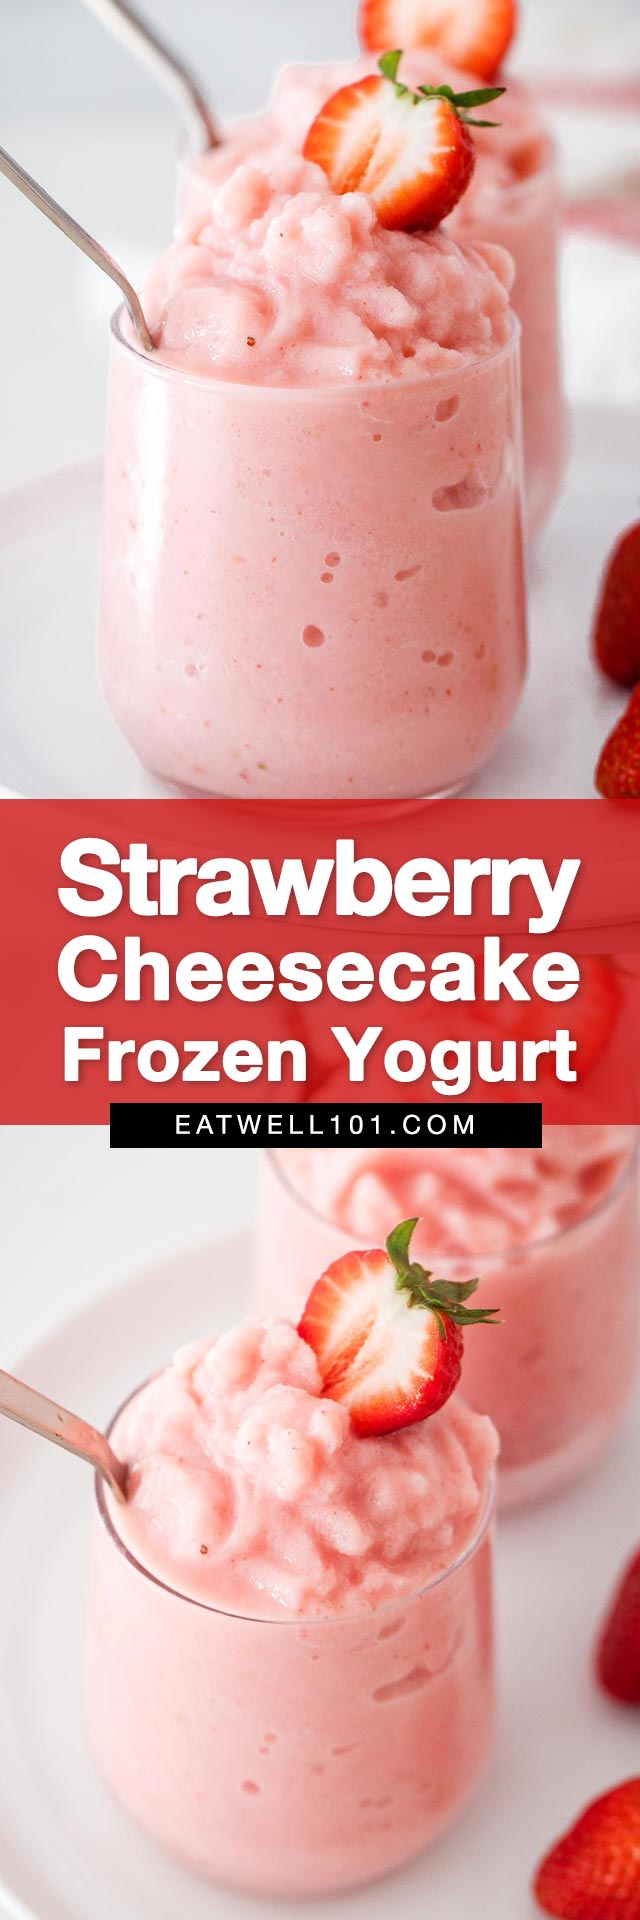 5-Minute Strawberry Cheesecake Frozen Yogurt - Easy and creamy, satisfy your sweet tooth without the guilt.